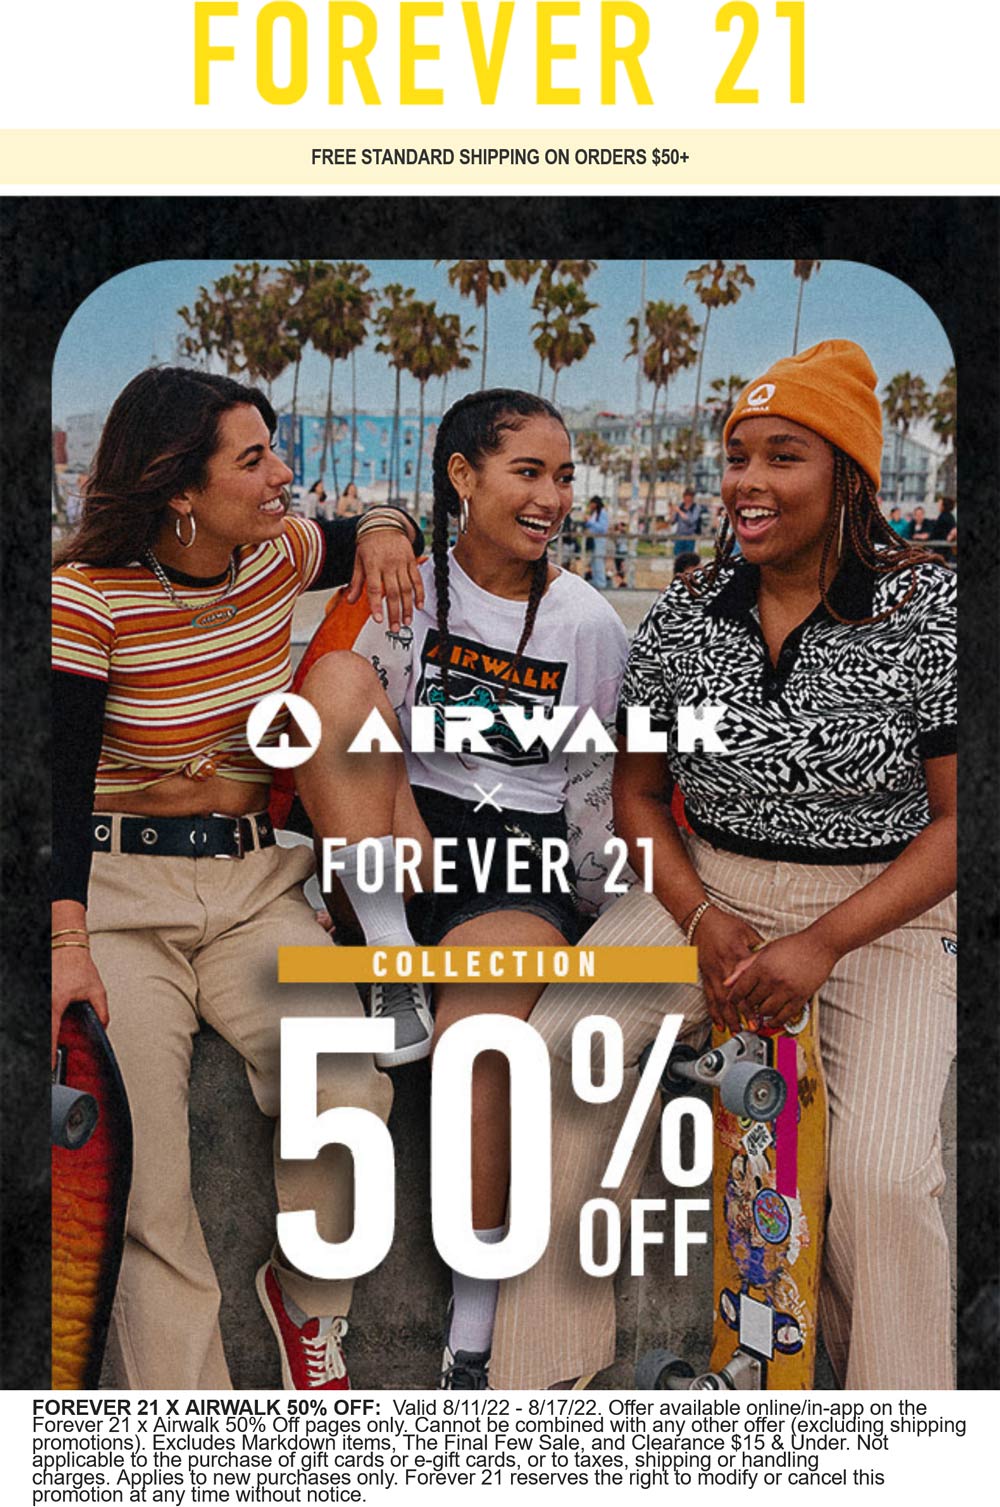 Forever 21 stores Coupon  50% off the Forever 21 x Airwalk collection online #forever21 